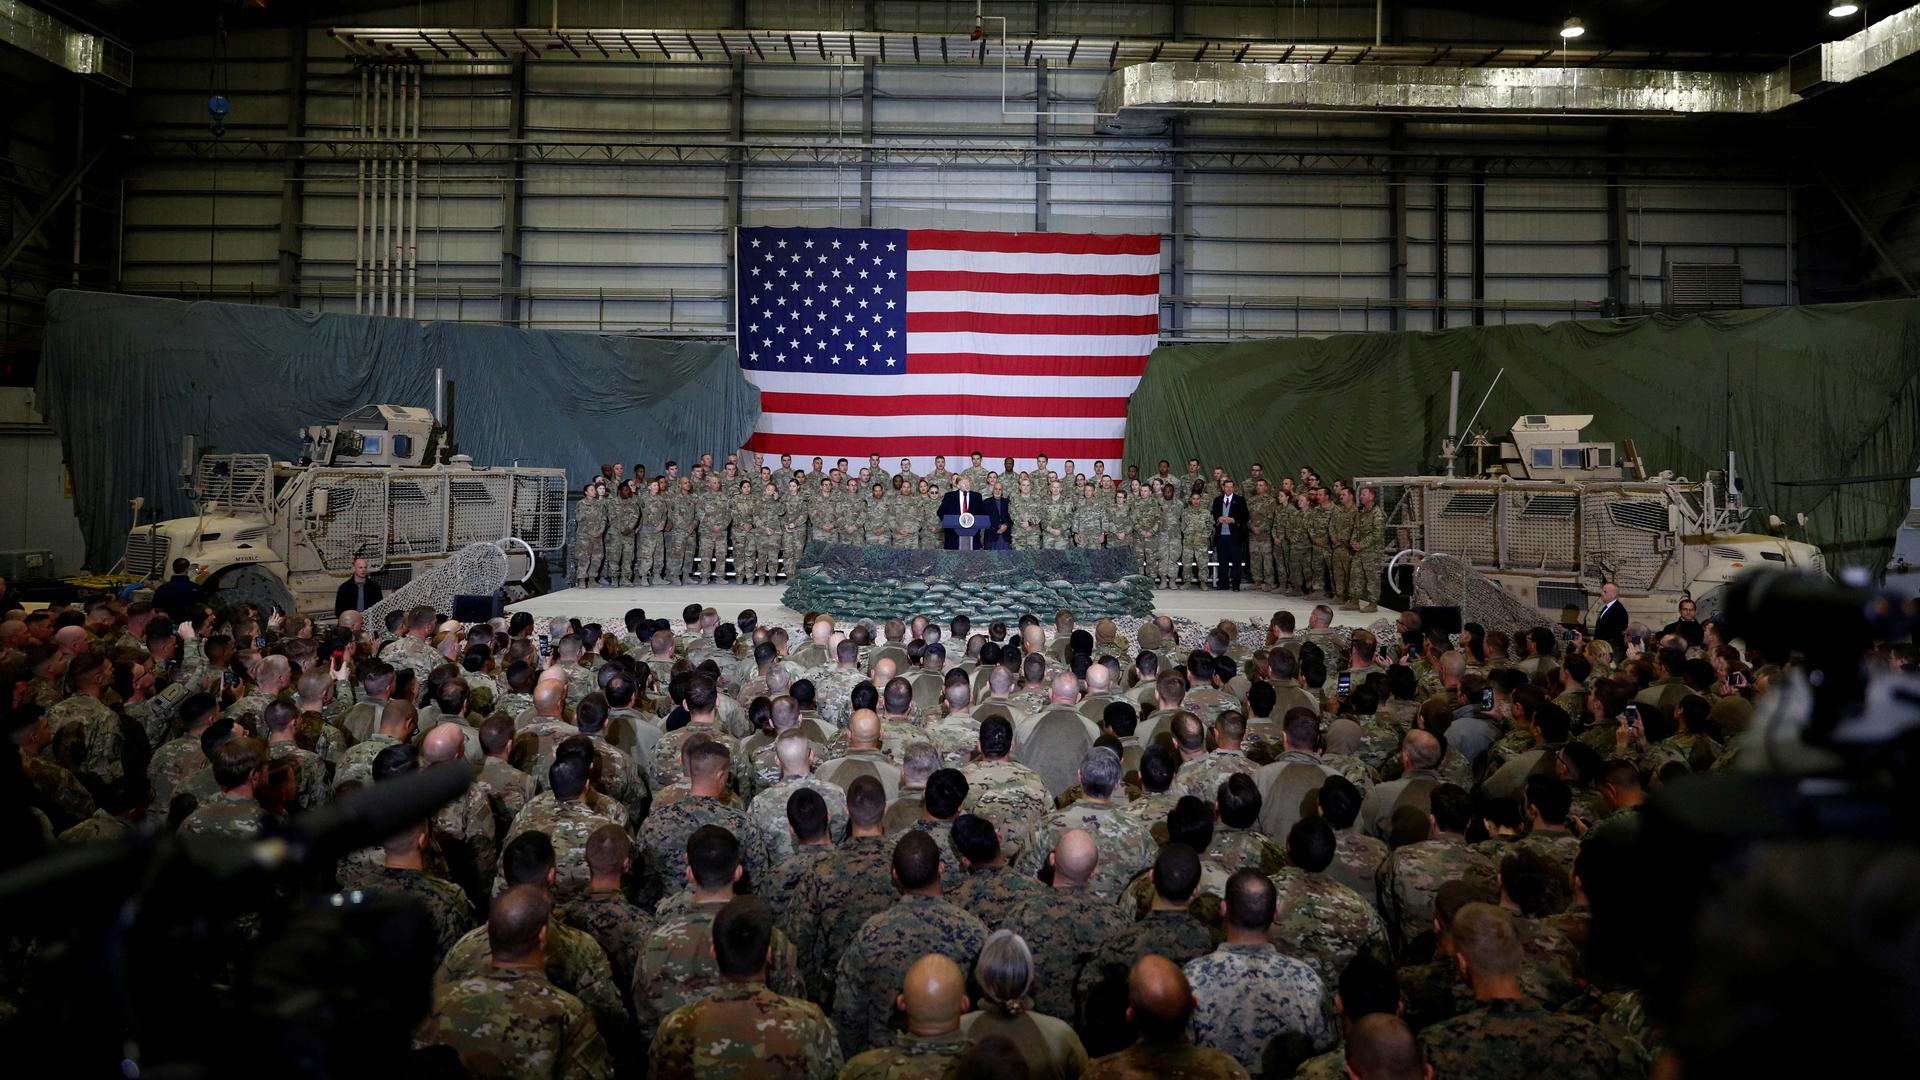 US President Donald Trump delivers remarks to US troops during an unannounced visit to Bagram Air Base, Afghanistan on November 28, 2019.